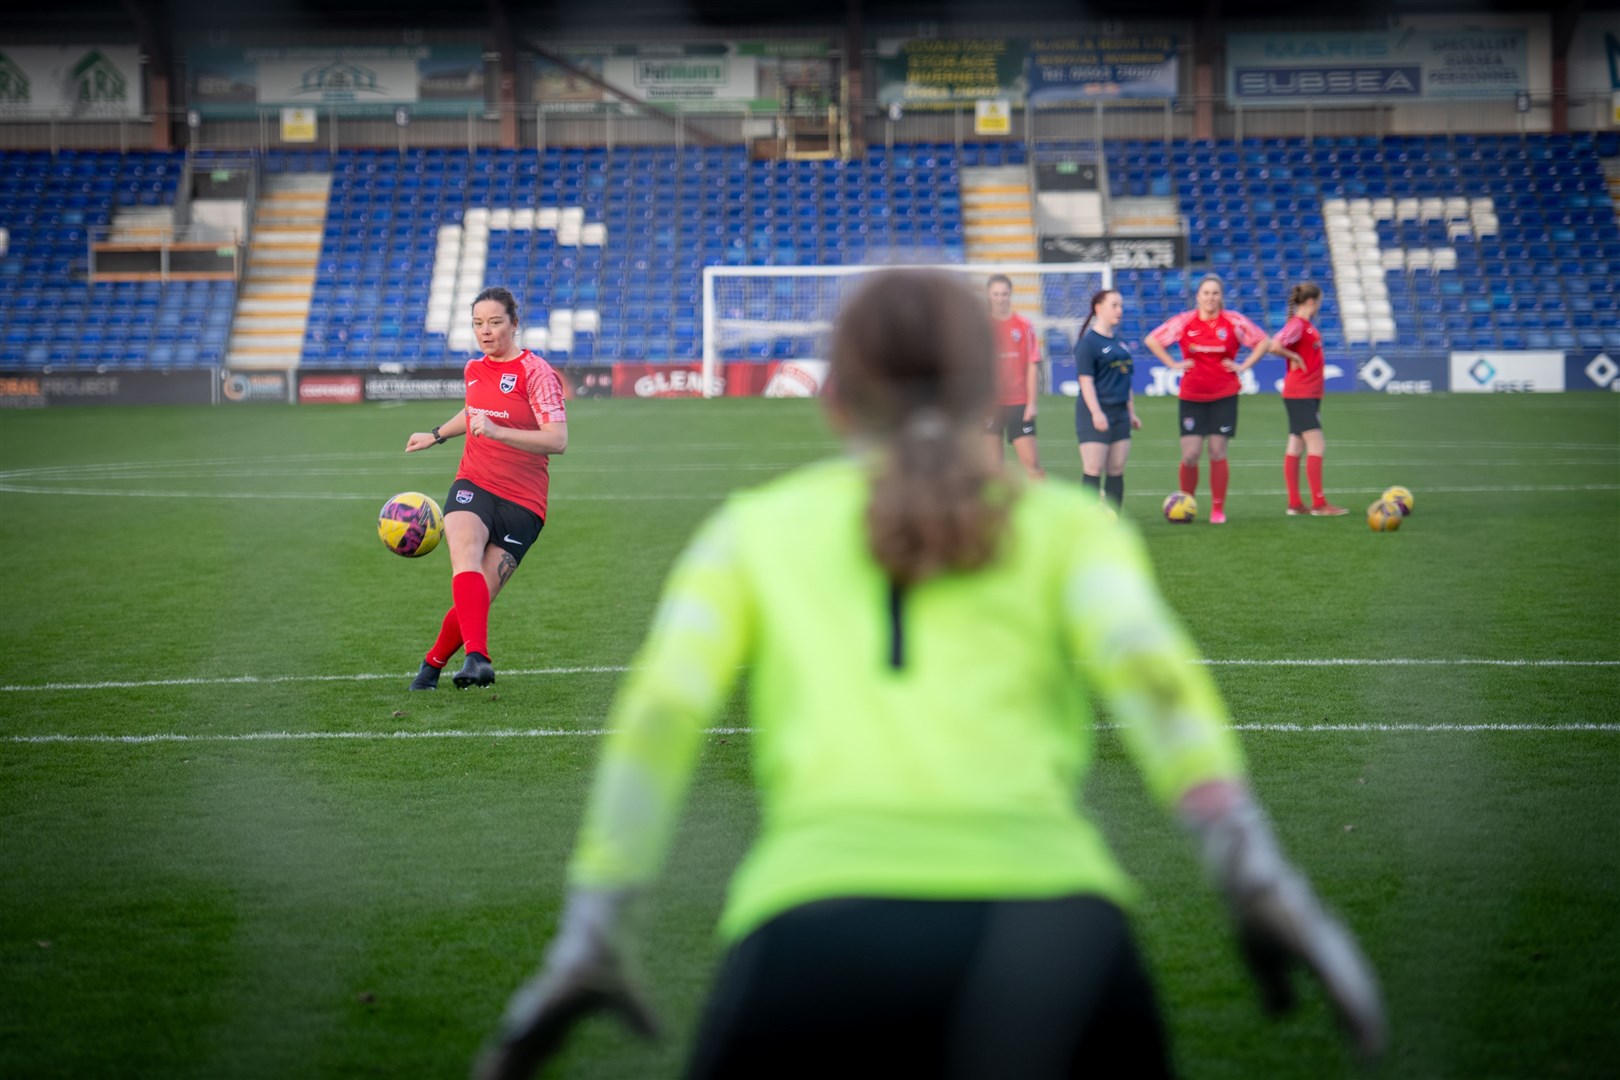 Ross County players had a kickabout at the Global Energy Stadium to mark Scottish Women and Girls in Sport Week. Picture: Callum Mackay